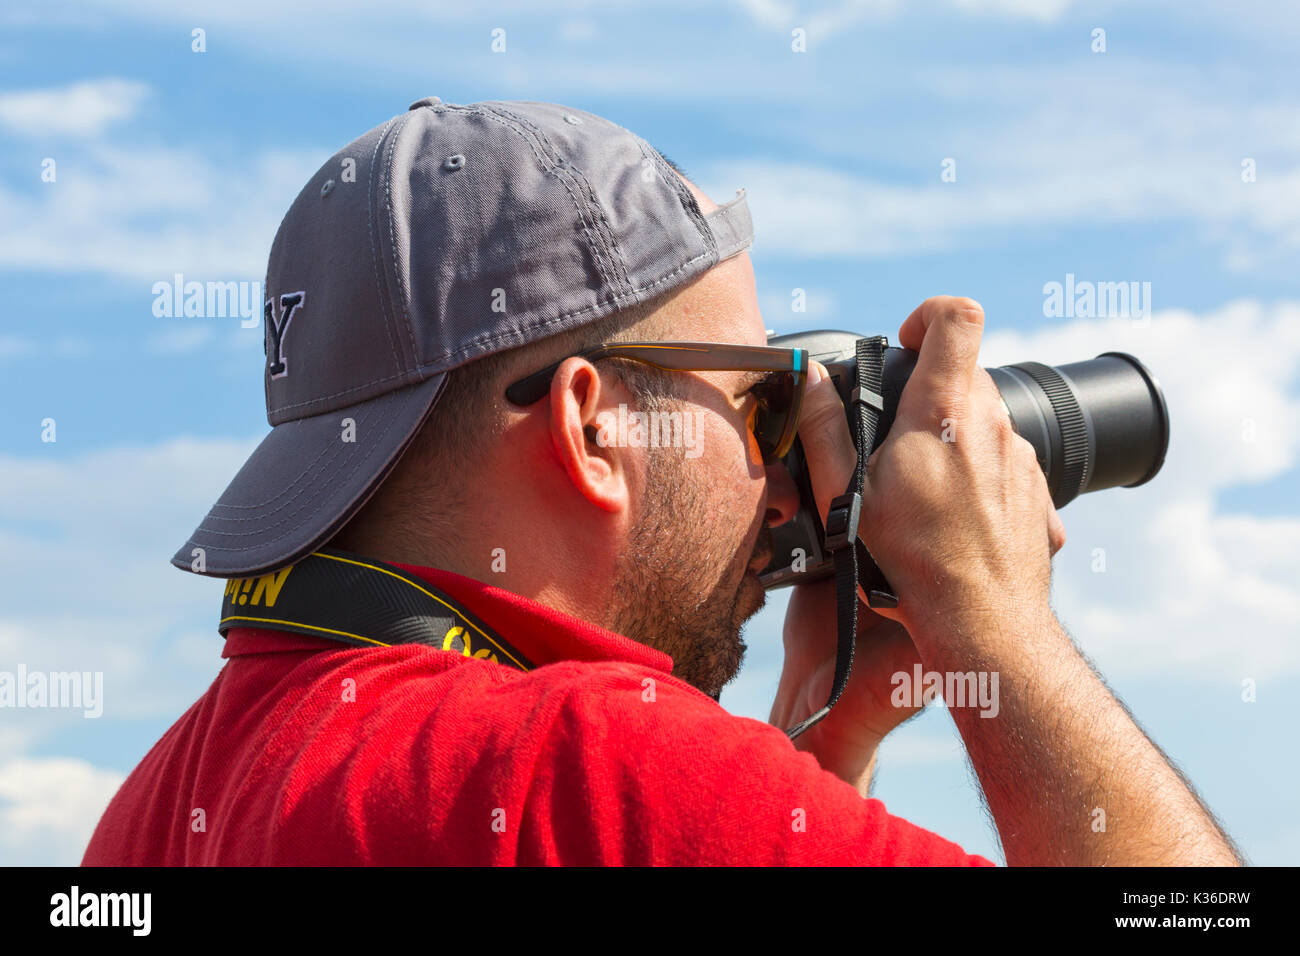 Bournemouth, UK. 1st Sep, 2017. The second day of the tenth anniversary of the Bournemouth Air Festival on a warm sunny day on the South Coast. Photographer ready to capture the action. Credit: Carolyn Jenkins/Alamy Live News Stock Photo